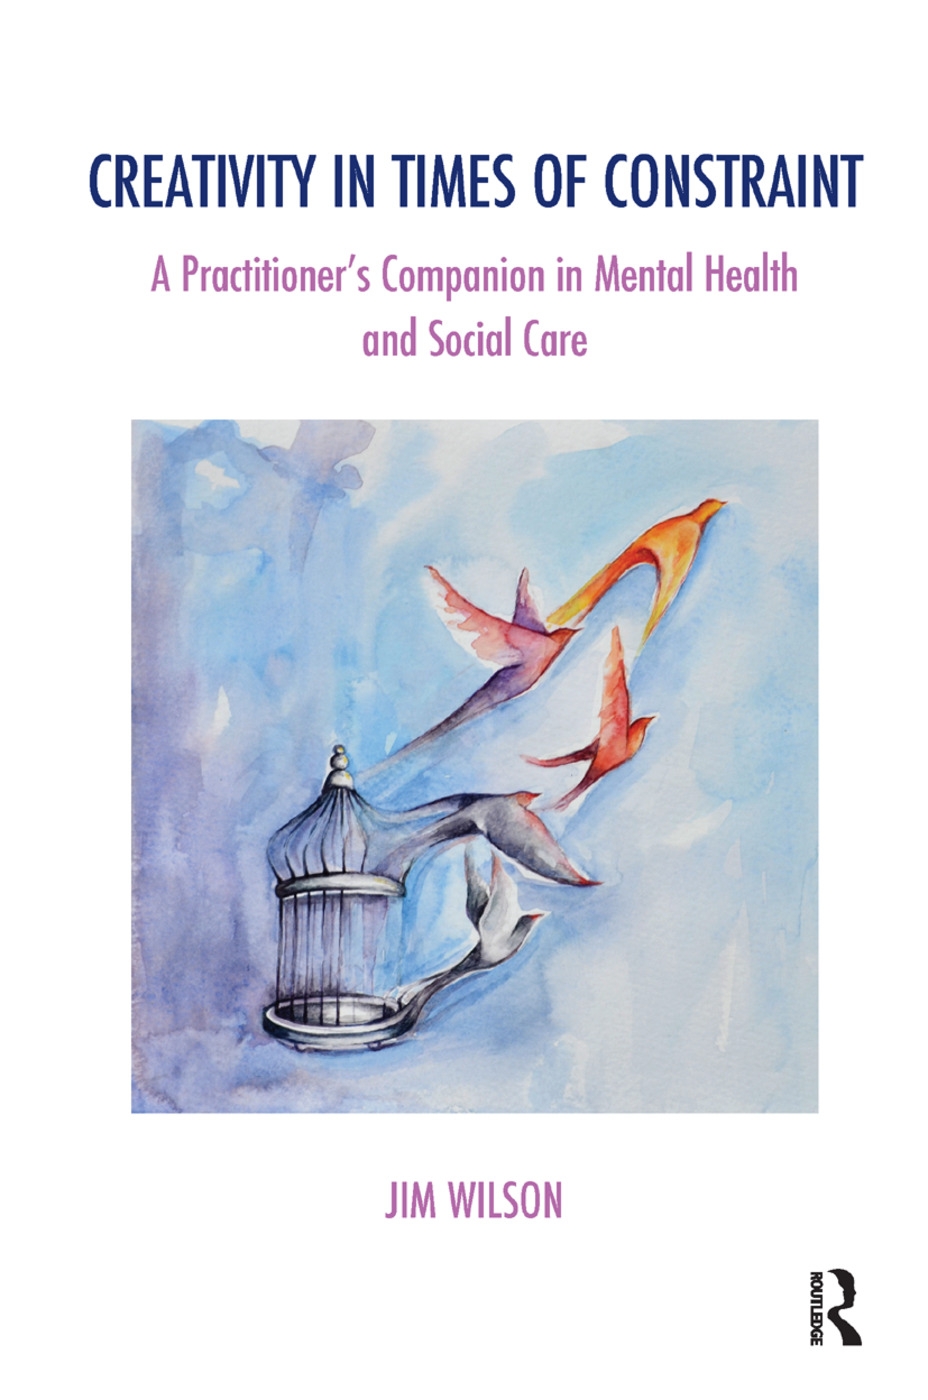 Creativity in Times of Constraint: A Practitioner’s Companion in Mental Health and Social Care